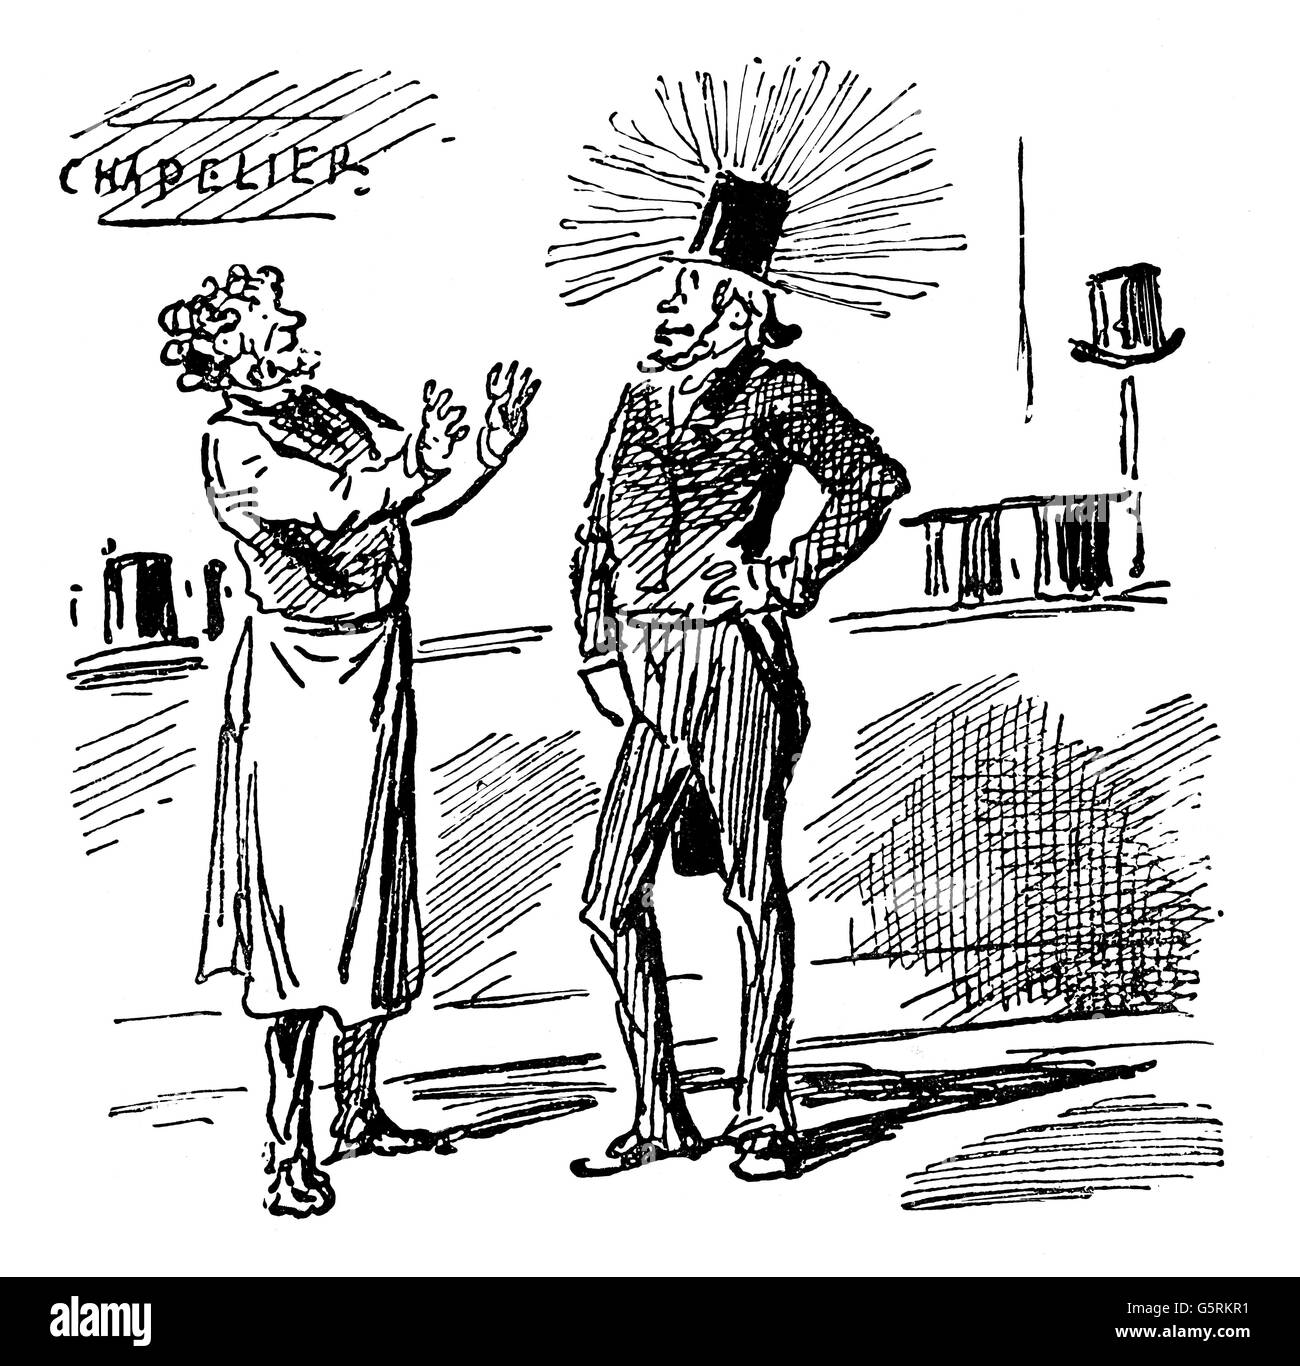 Wagner, Richard, 22.5.1813 - 13.2.1883, German composer, trying a hat with gloriole, caricature, by Cham, from 'Le Charivari', lithograph, Paris, 1876, from Karl Eugen Schmidt, Richard Wagner in French caricature, Stock Photo